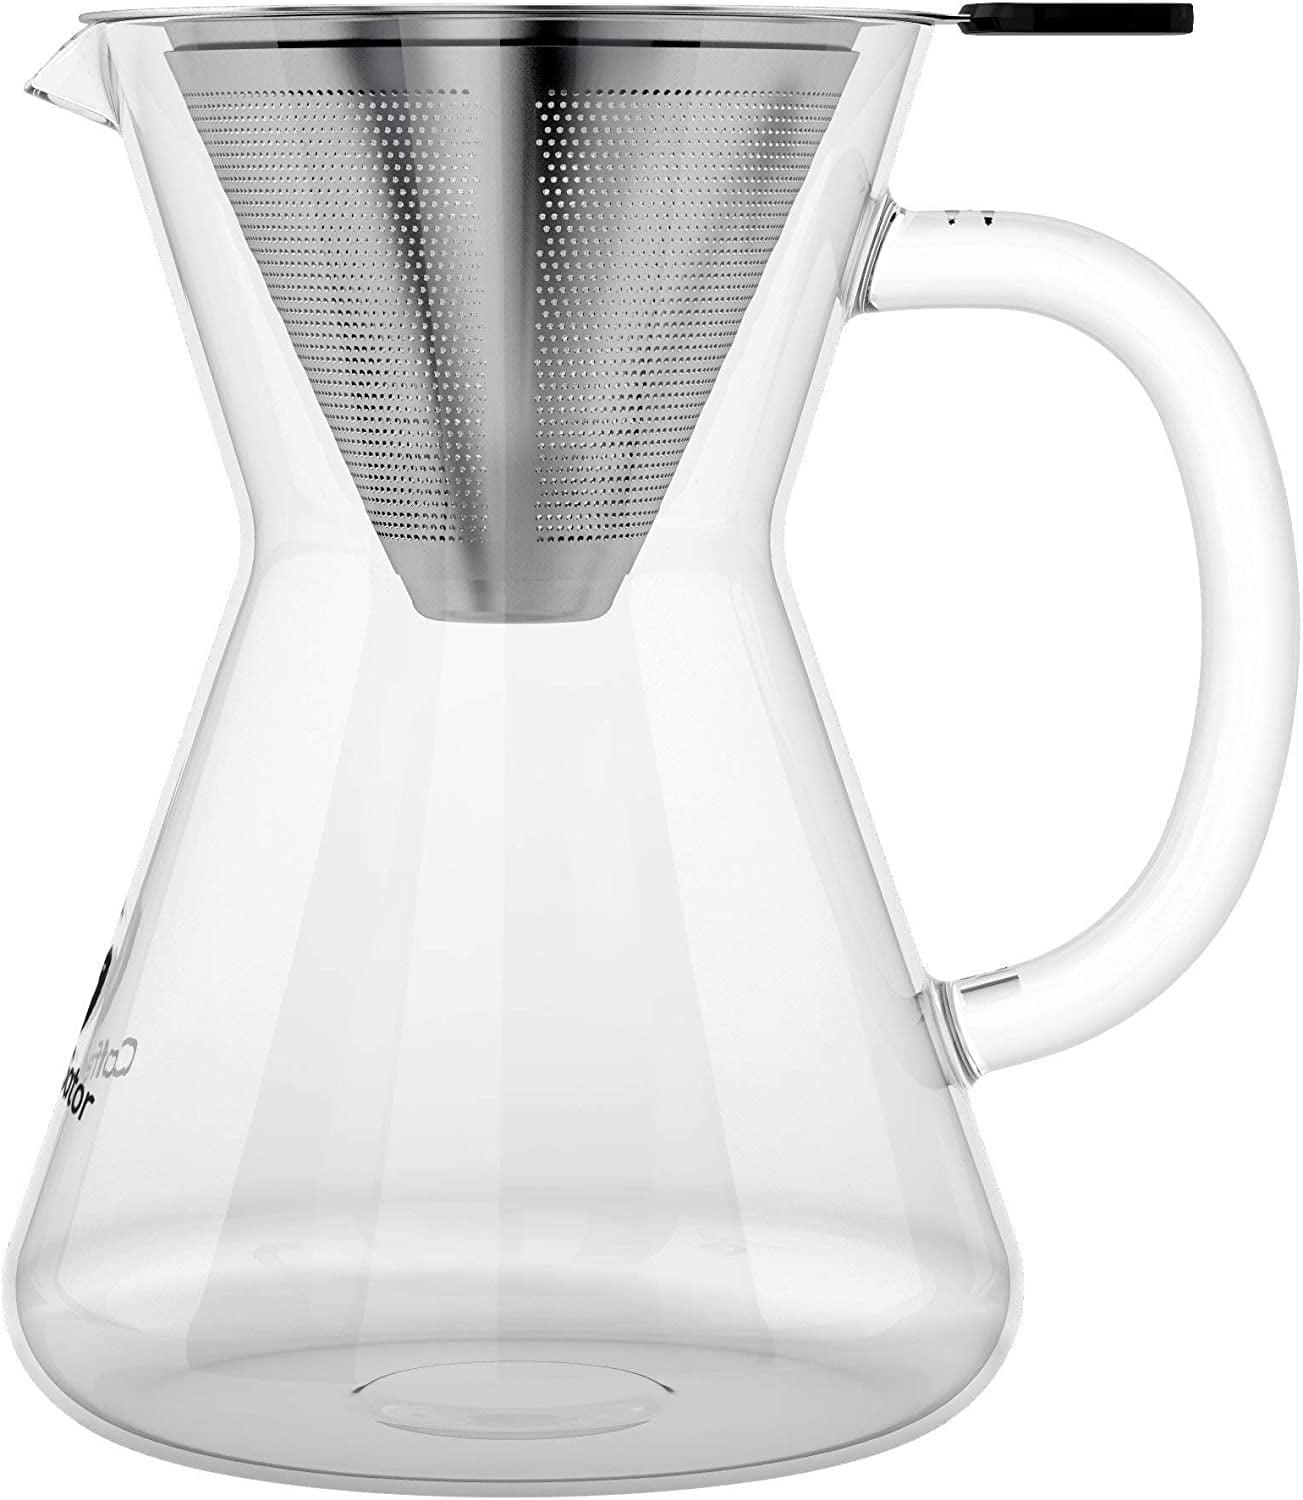 Coffee Gator Cold Brew Maker 47Oz Iced Tea and Pitch Glass Carafe